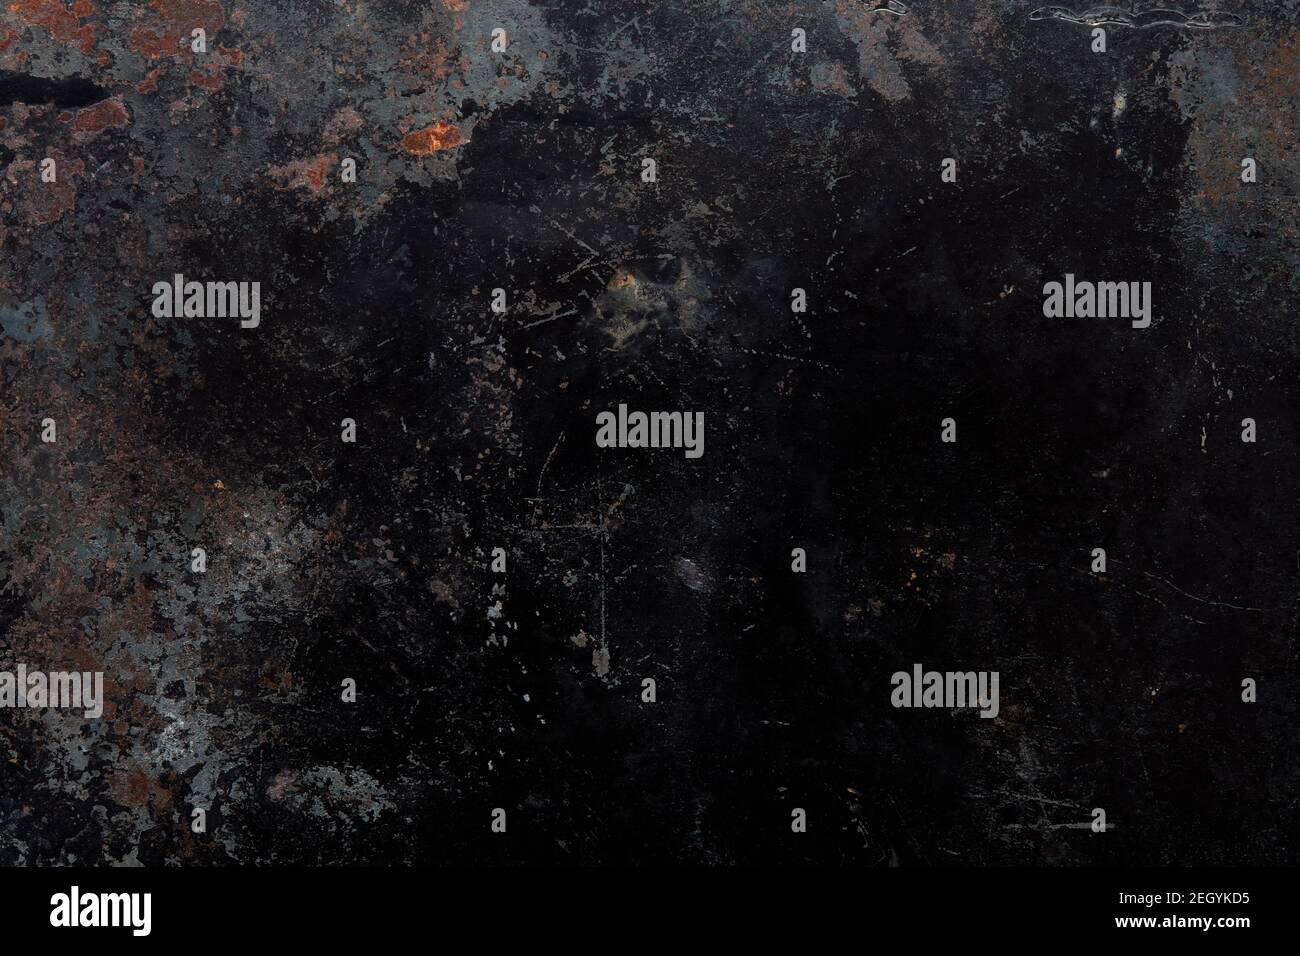 Black, corroded metal texture background with rusty parts Stock Photo